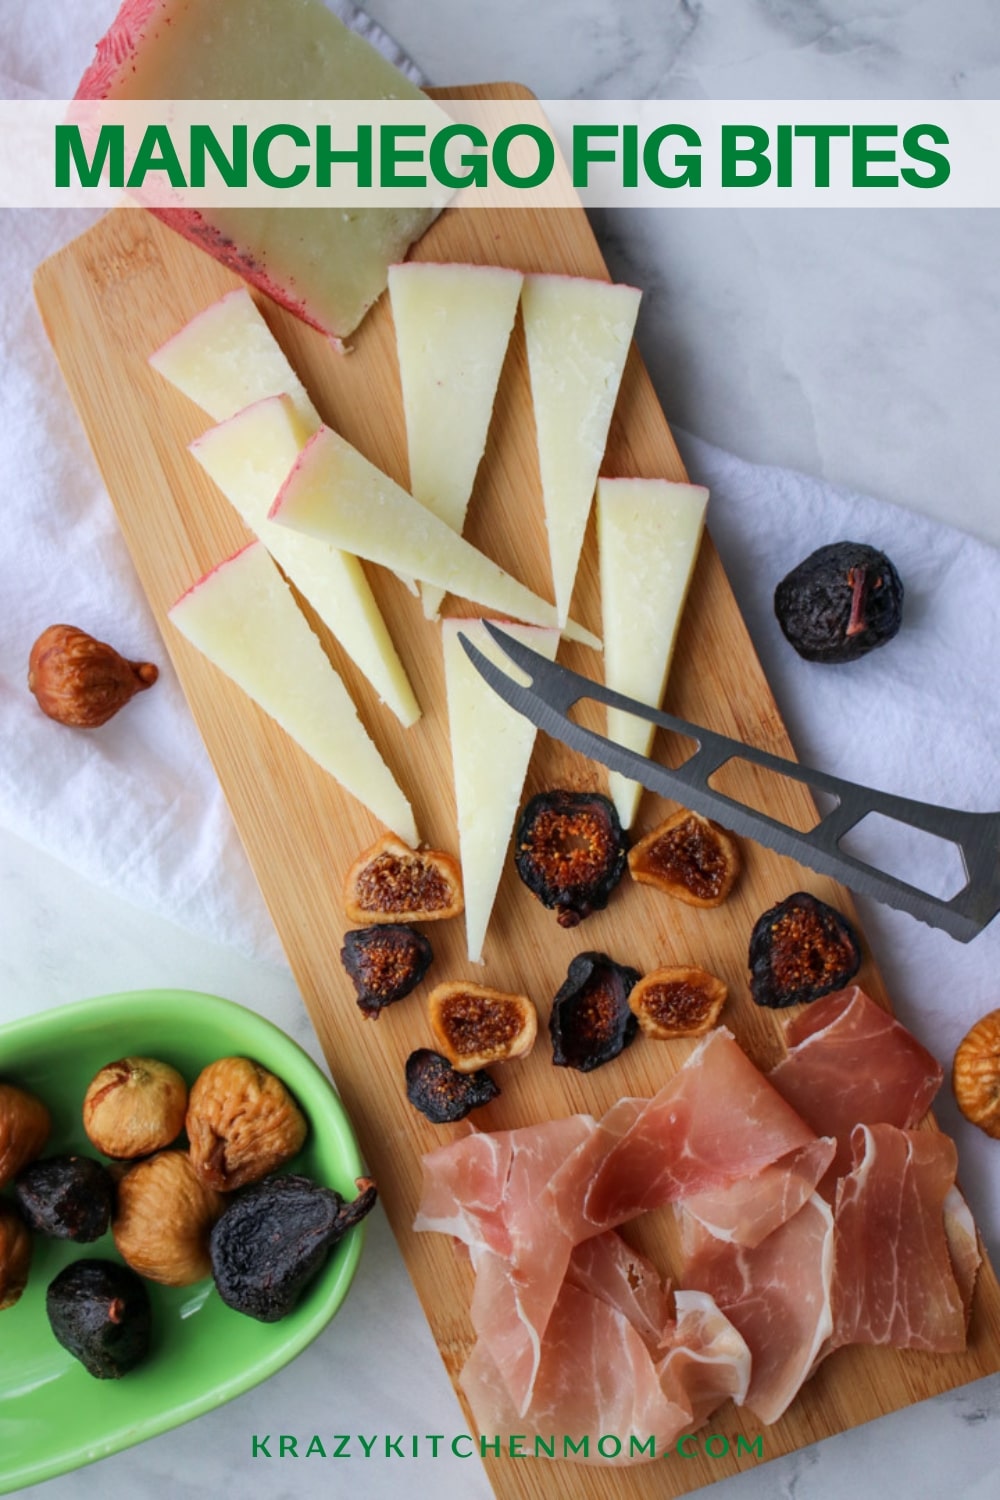 Buttery Nutty Manchego cheese paired with fresh fig slices, fig jam, and prosciutto make the perfect 2-bite handheld appetizer. This super simple appetizer will definitely be on my holiday appetizer menu this year! via @krazykitchenmom